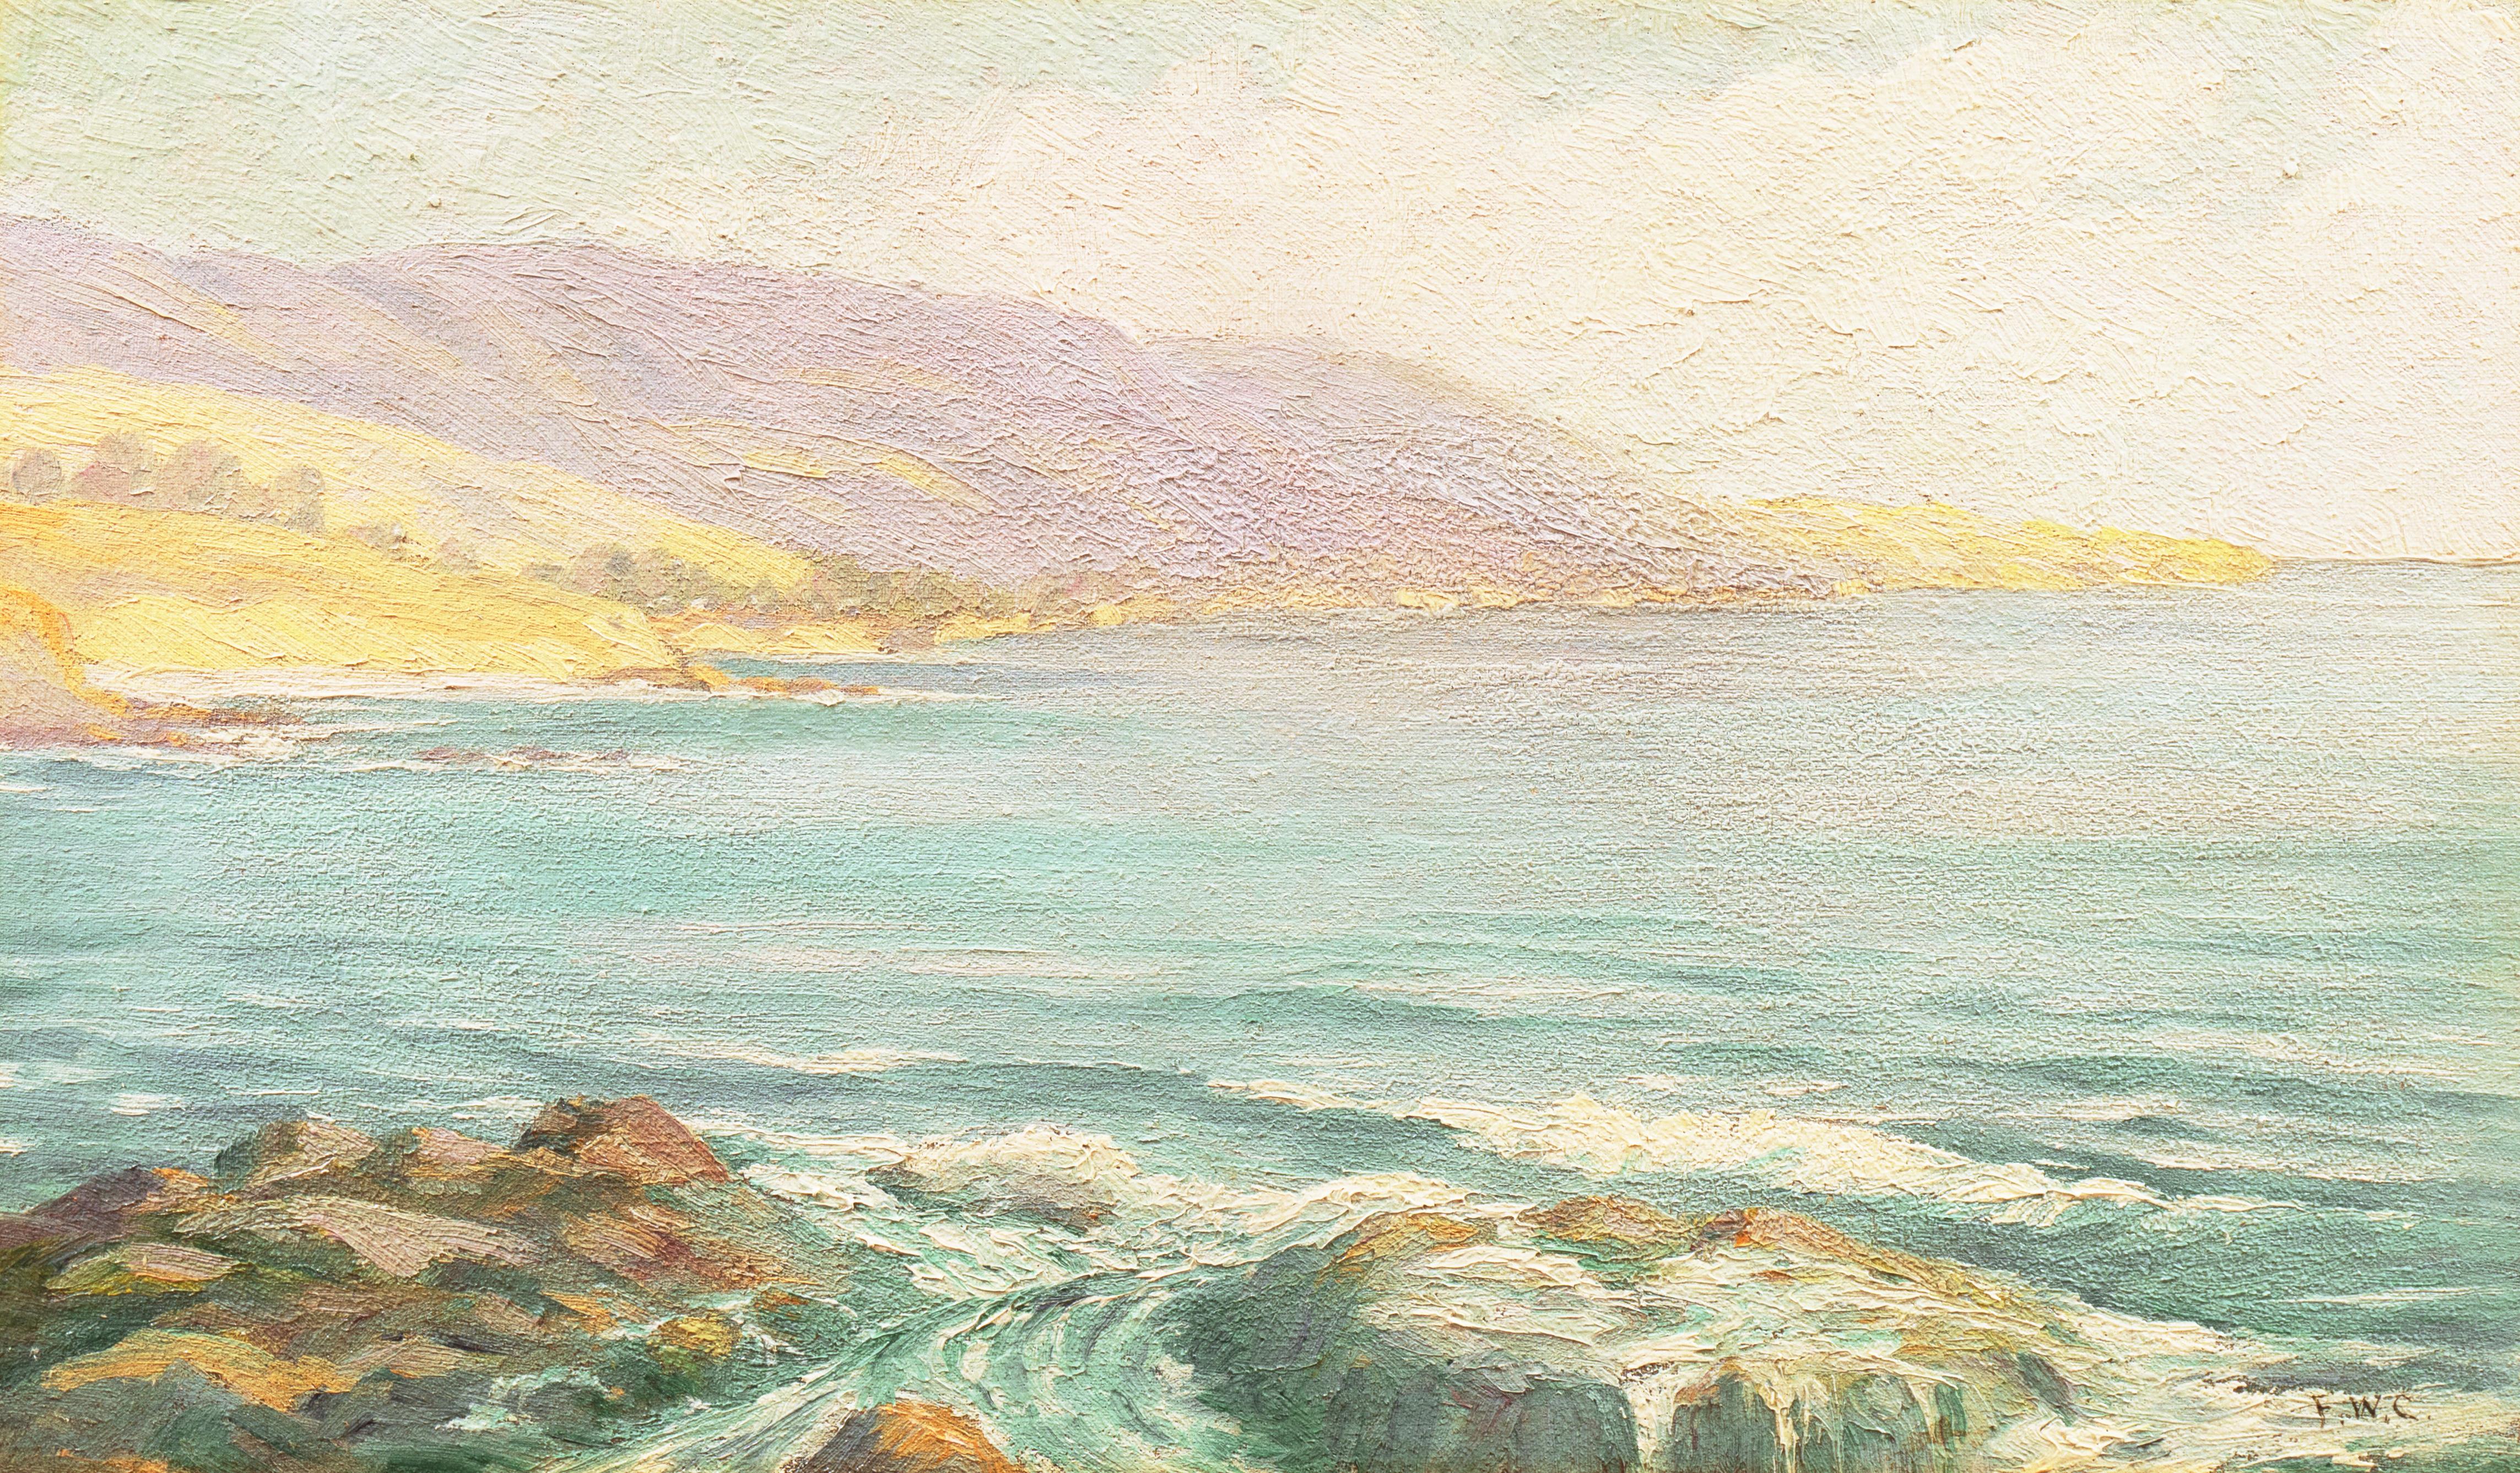  'California Headlands with a View of the Pacific', SFAA, Laguna Beach, ASL NYC - Painting by Frank William Cuprien